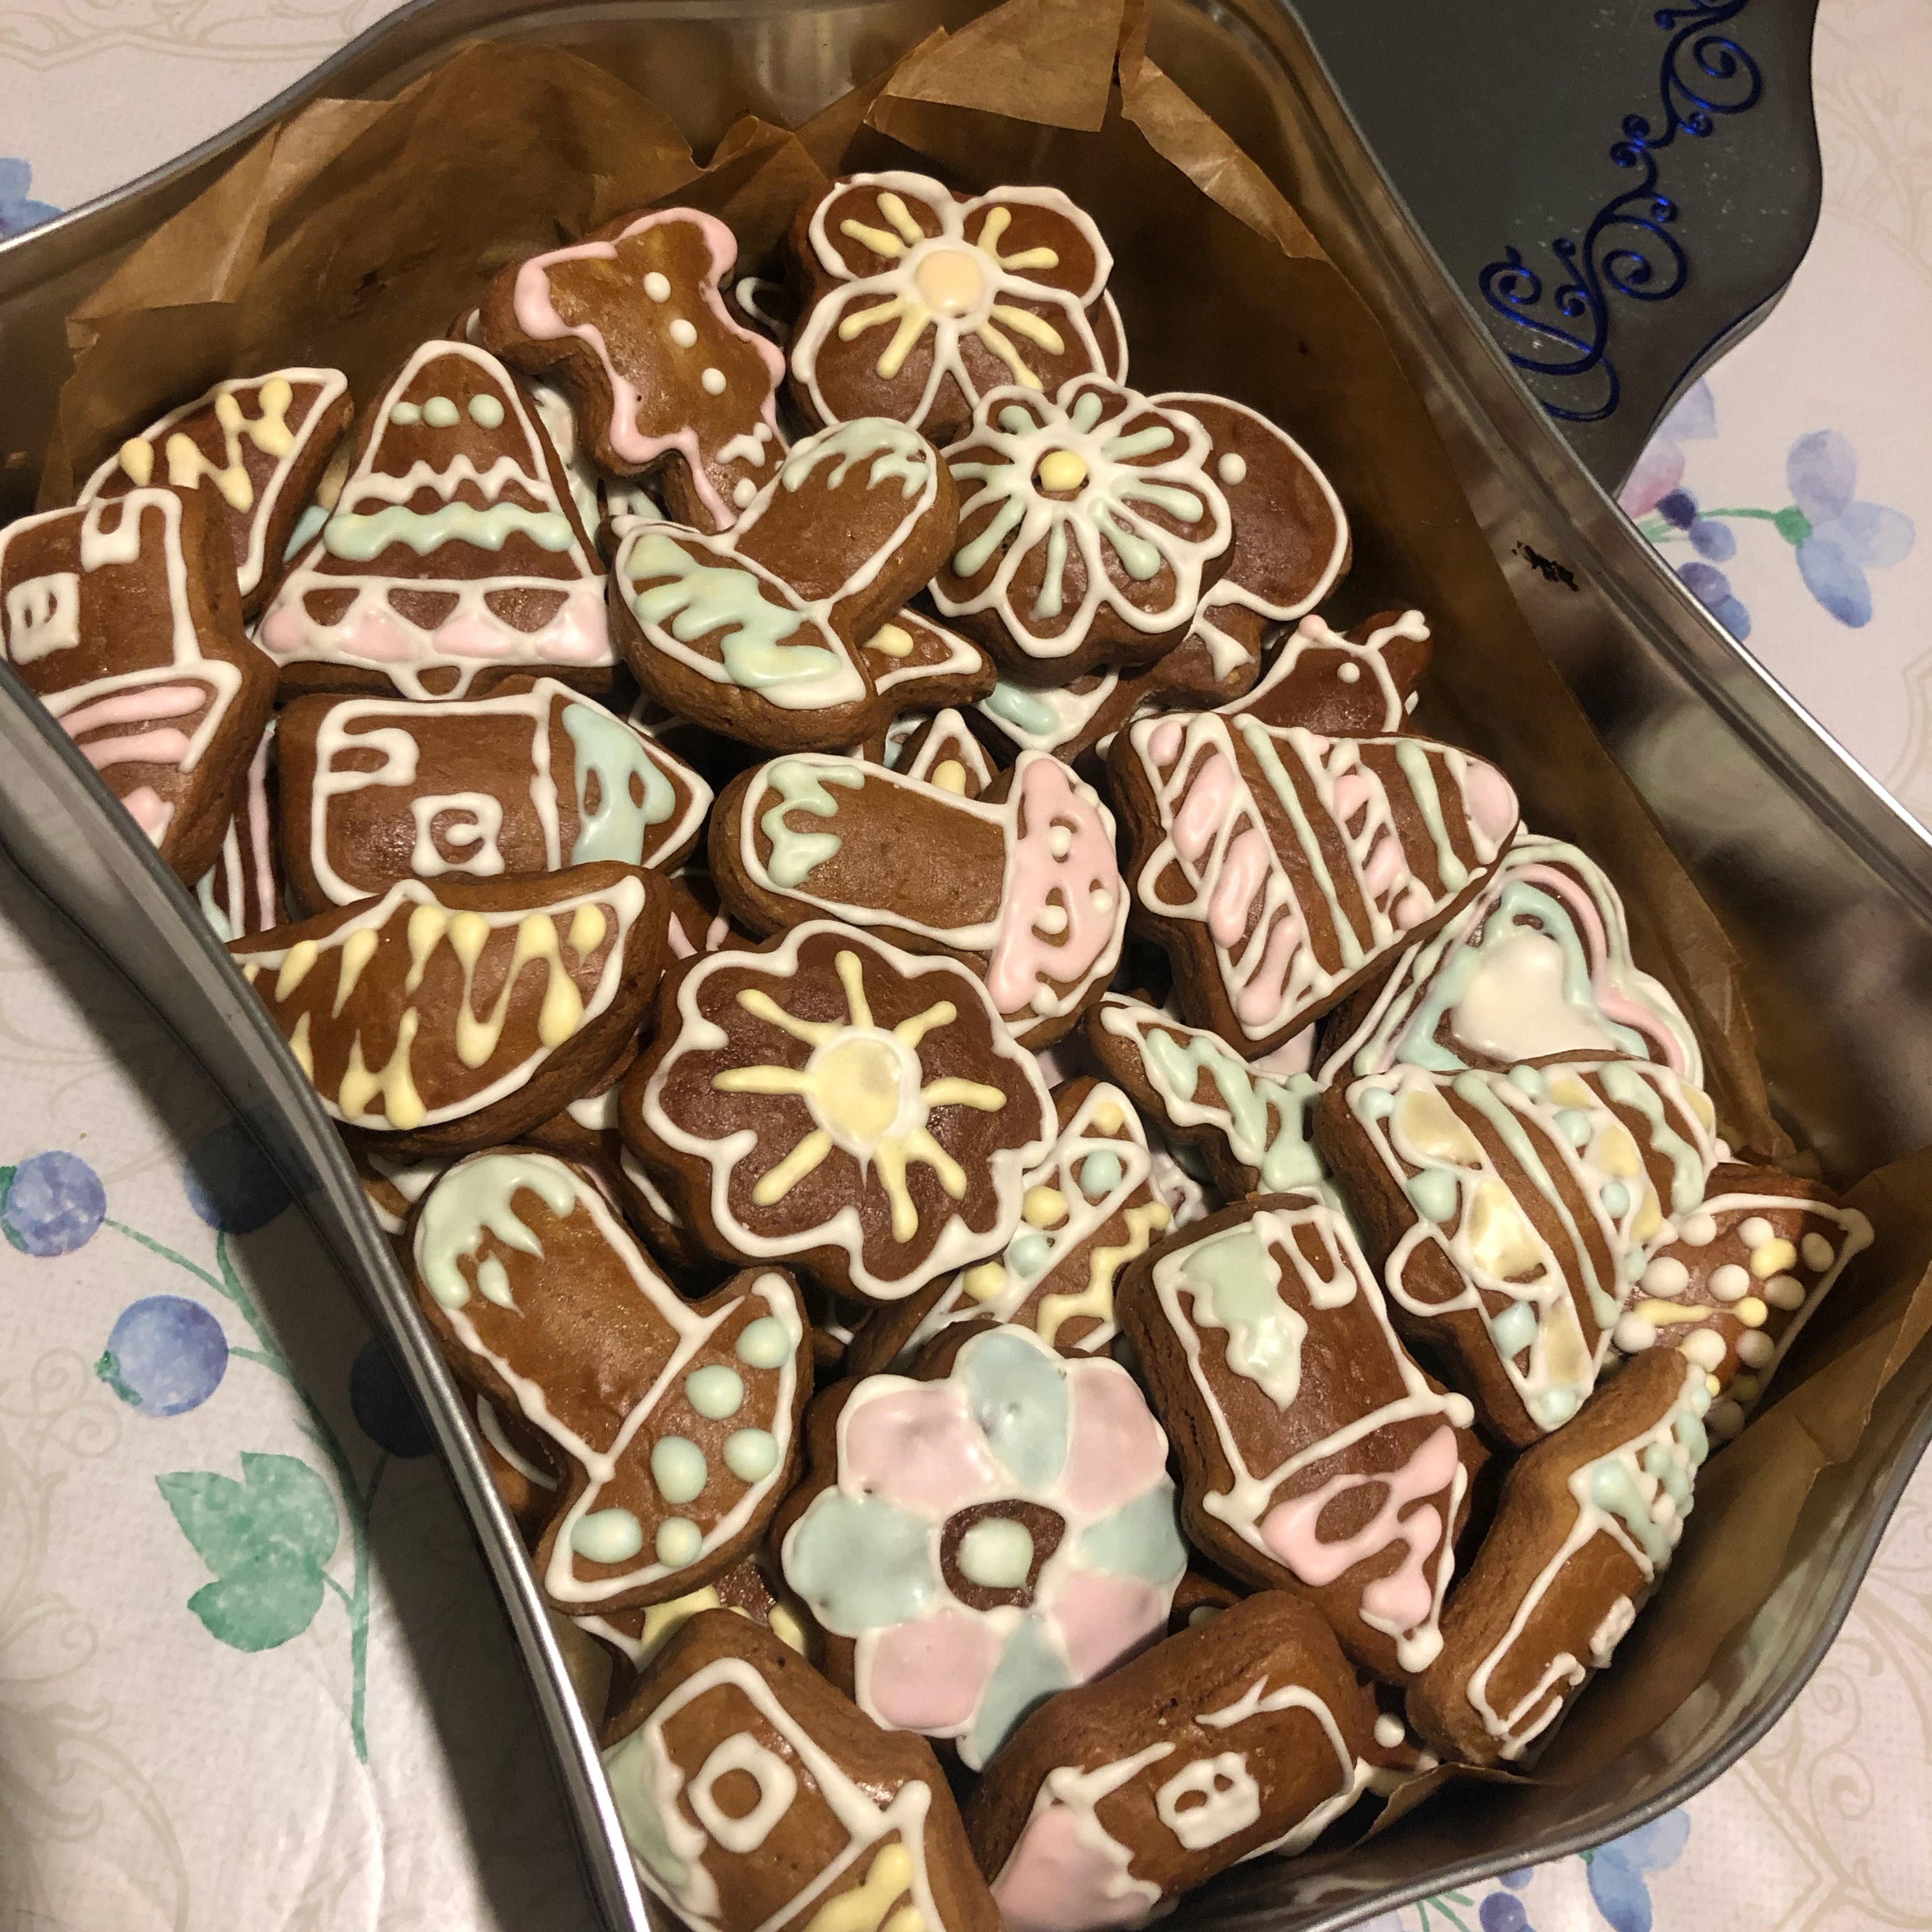 Gingerbread from Poland